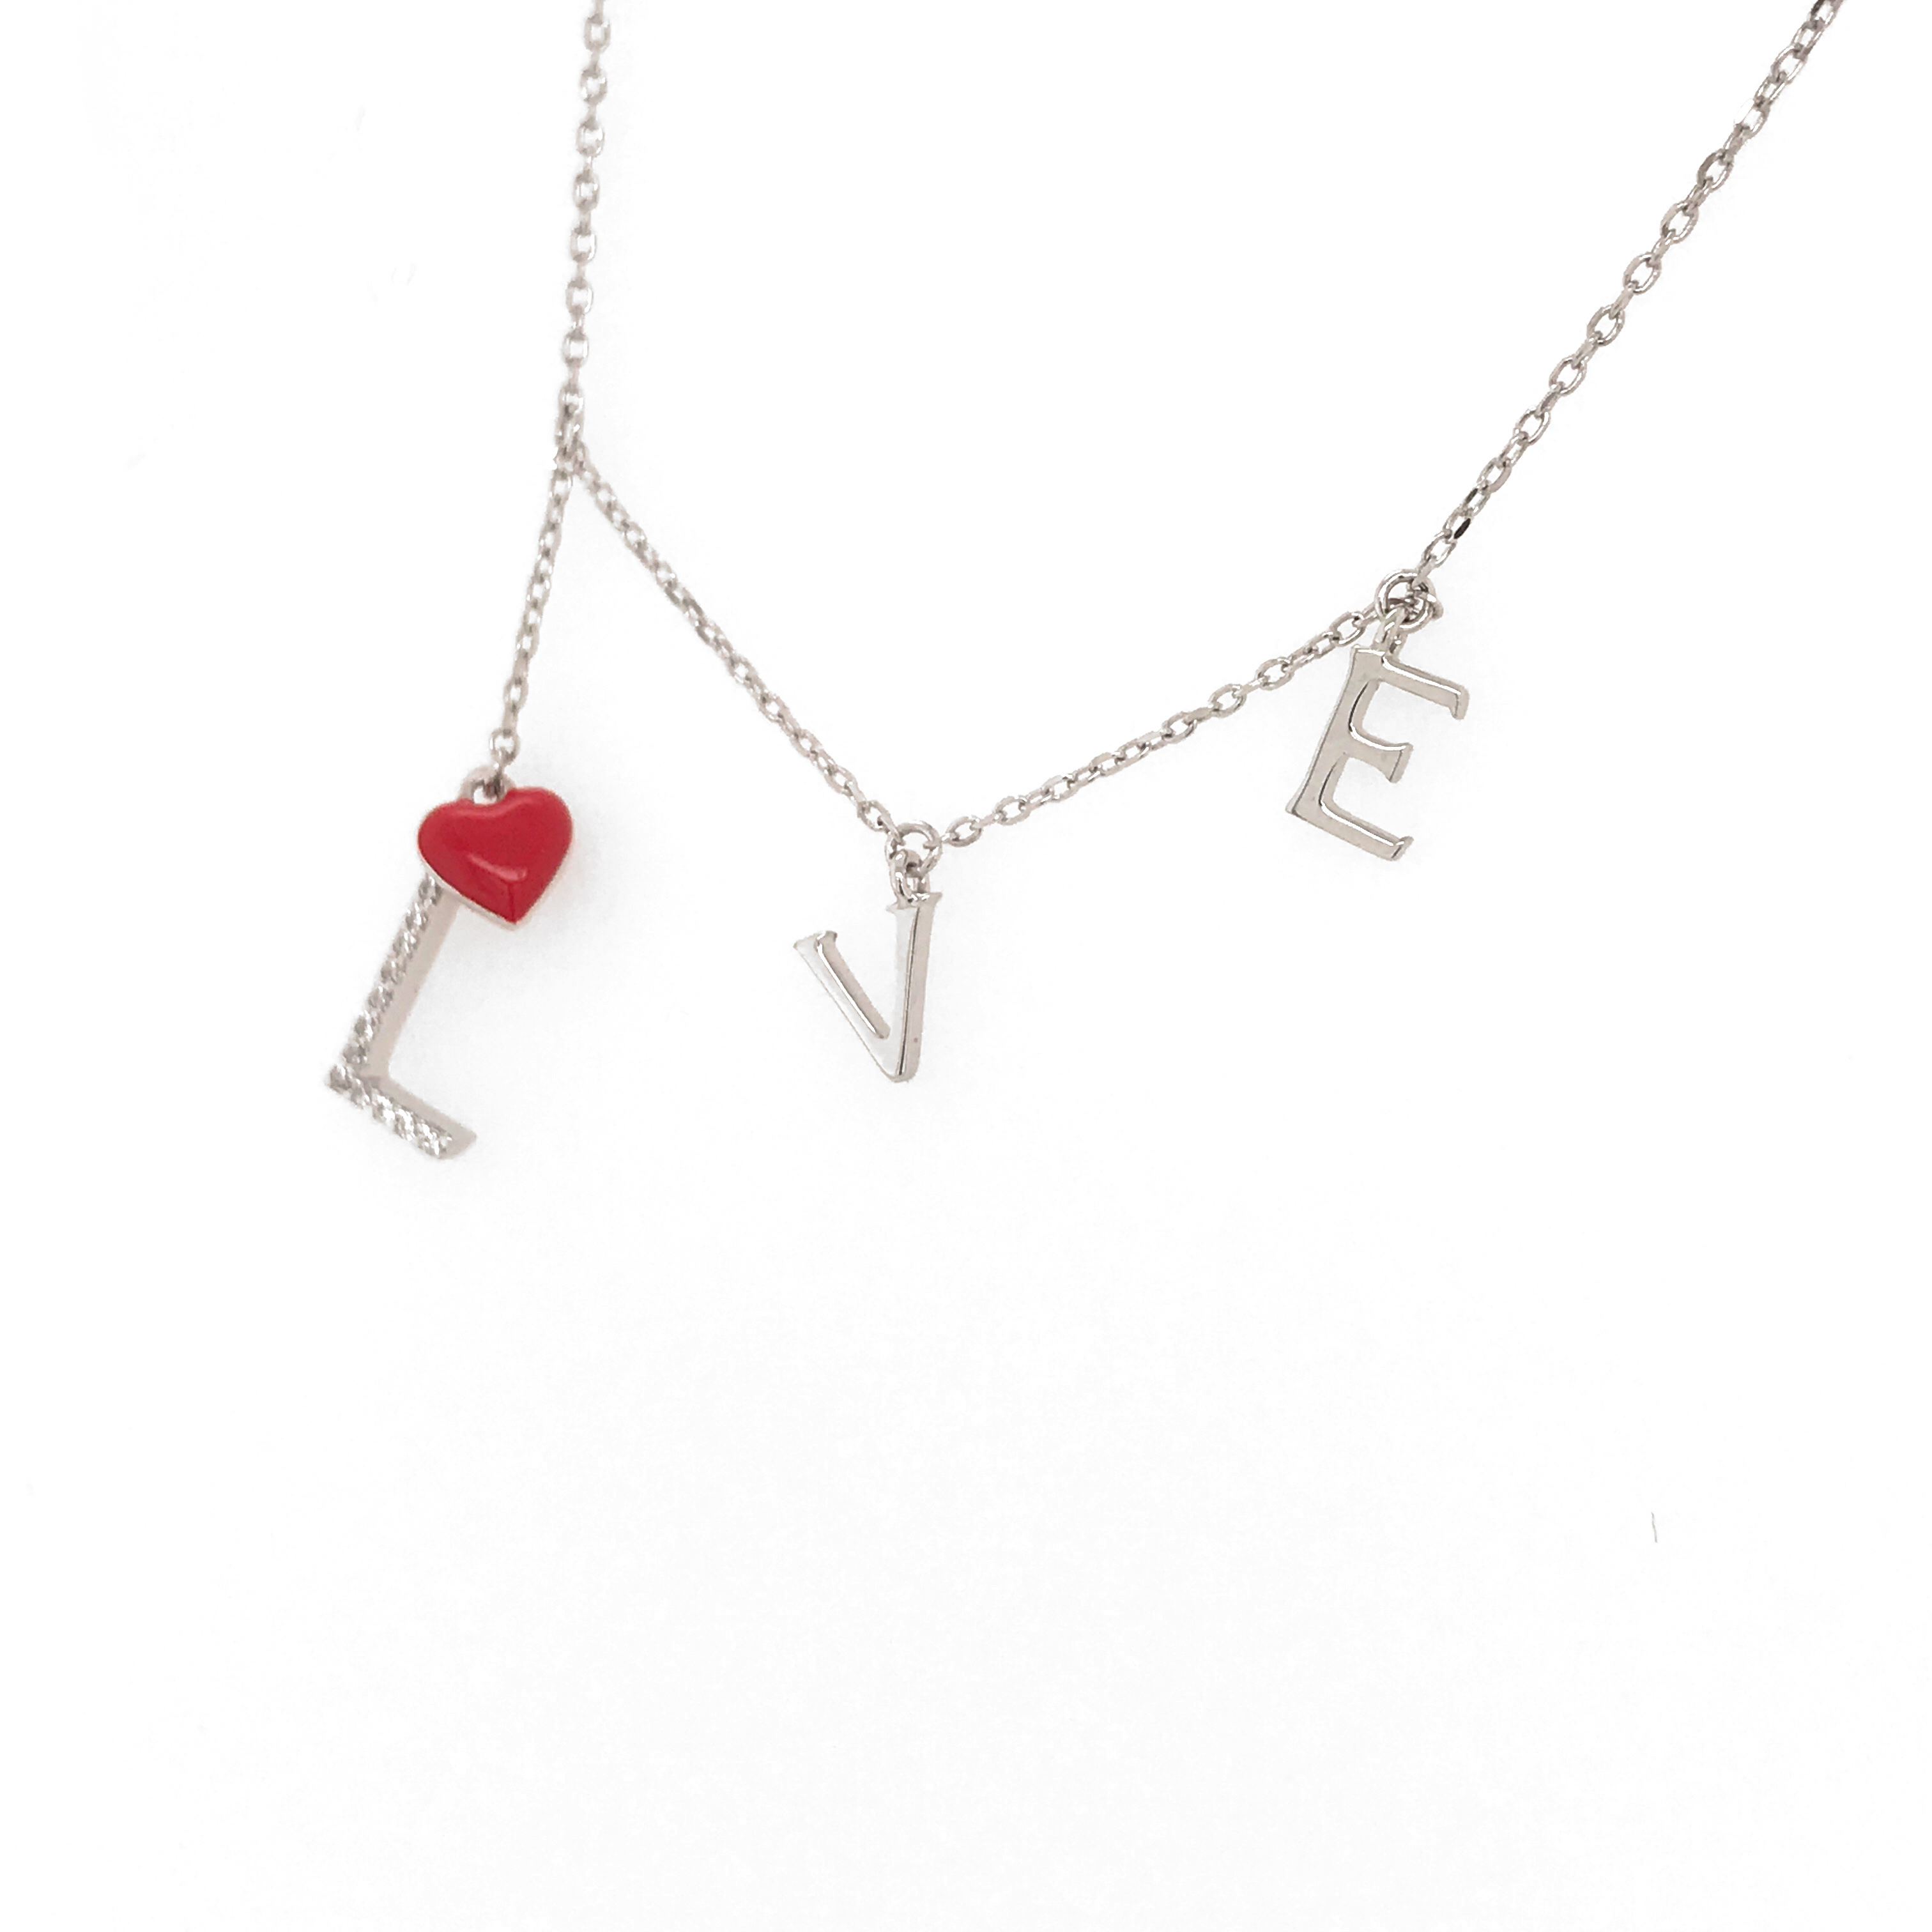 Cute Red Enamel Heart "LOVE" Letter Silver Chain Necklace Fashion Jewelry